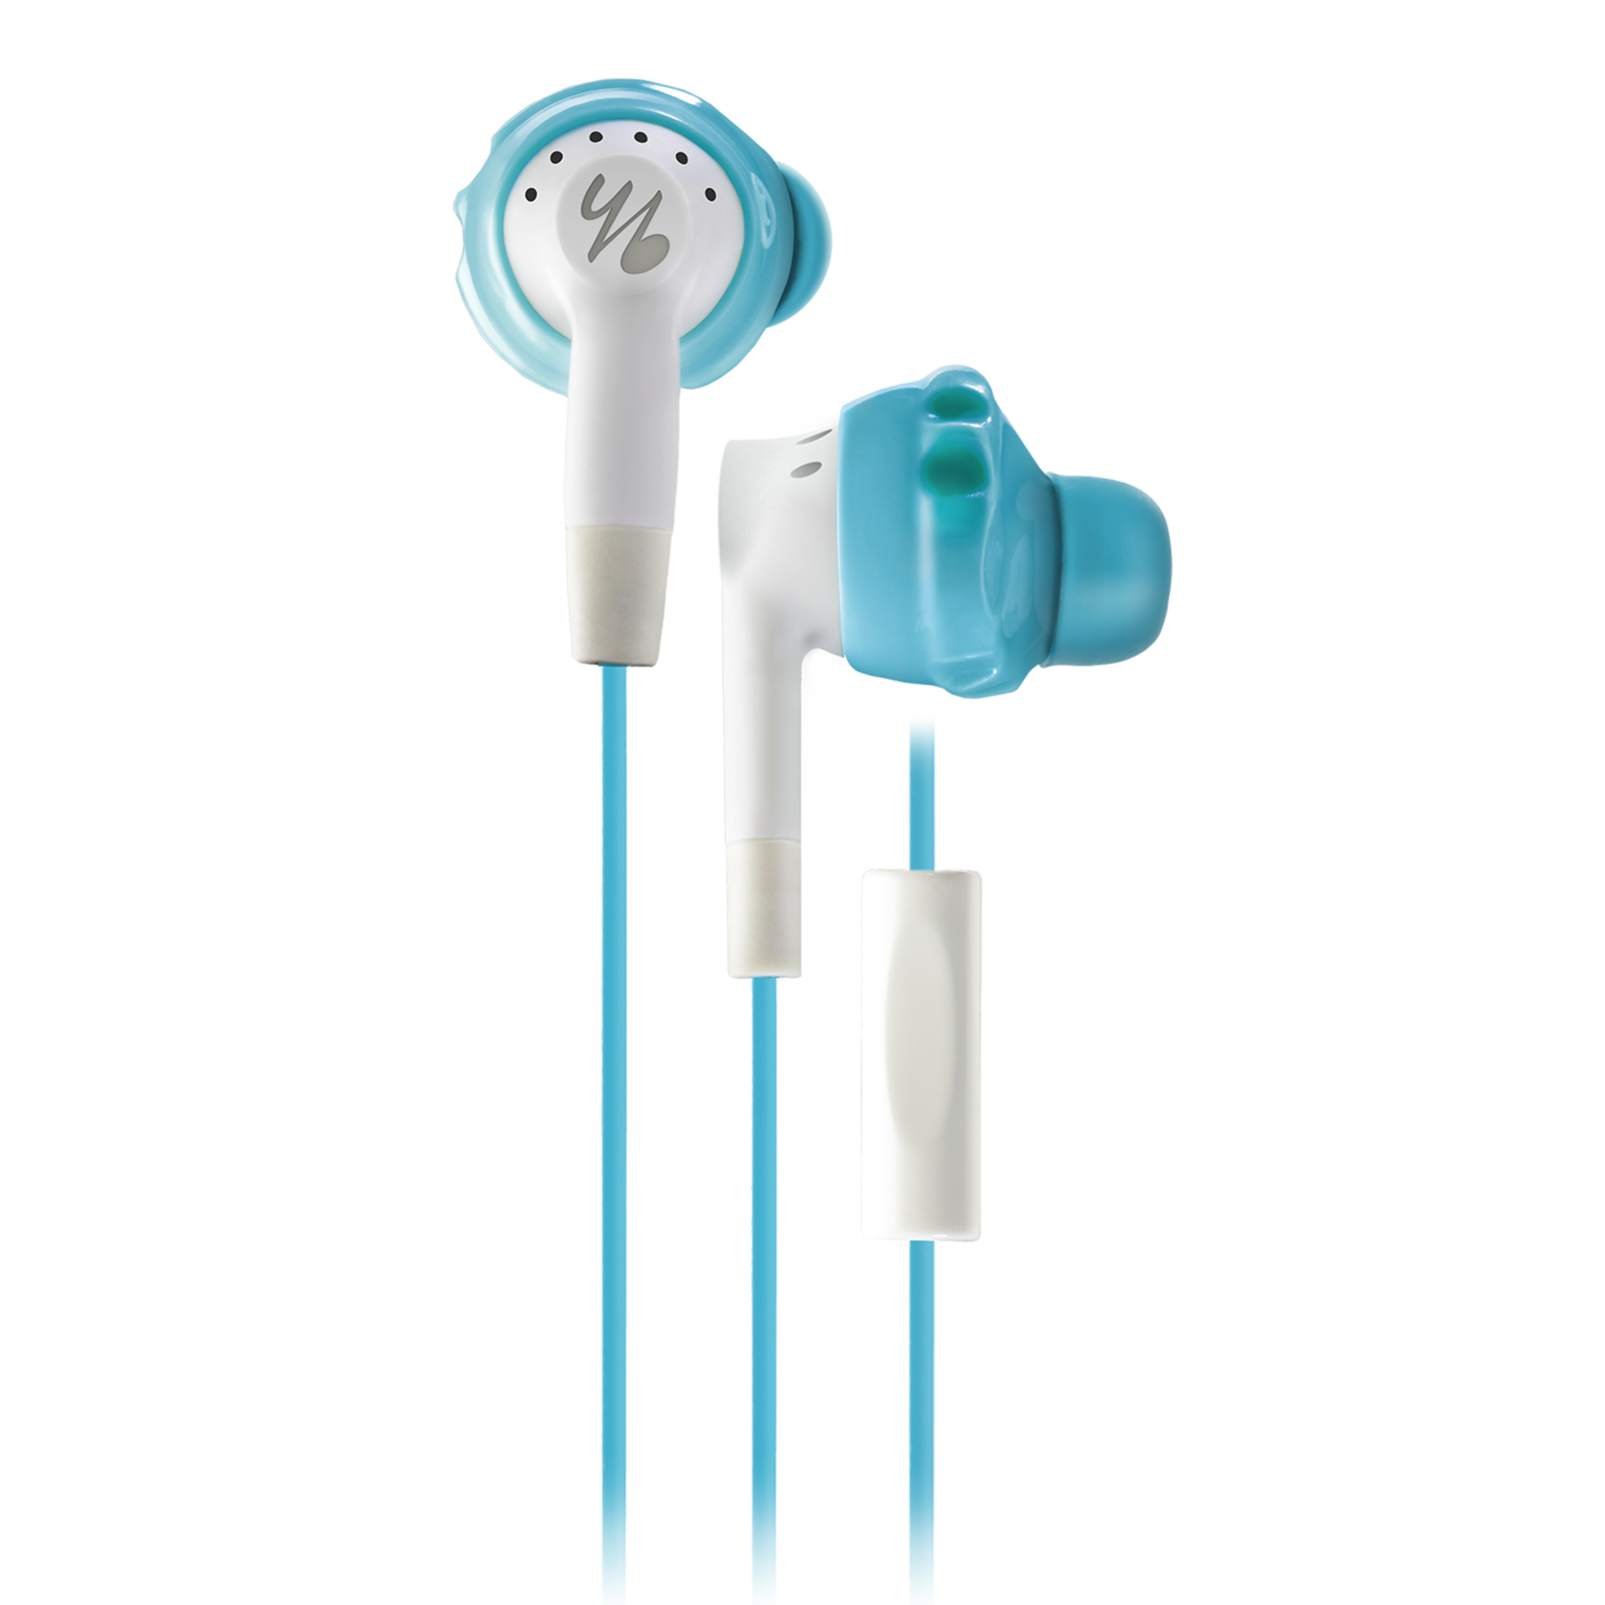 JBL Yurbuds Inspire 300 Earbuds for • Symphony Hifi